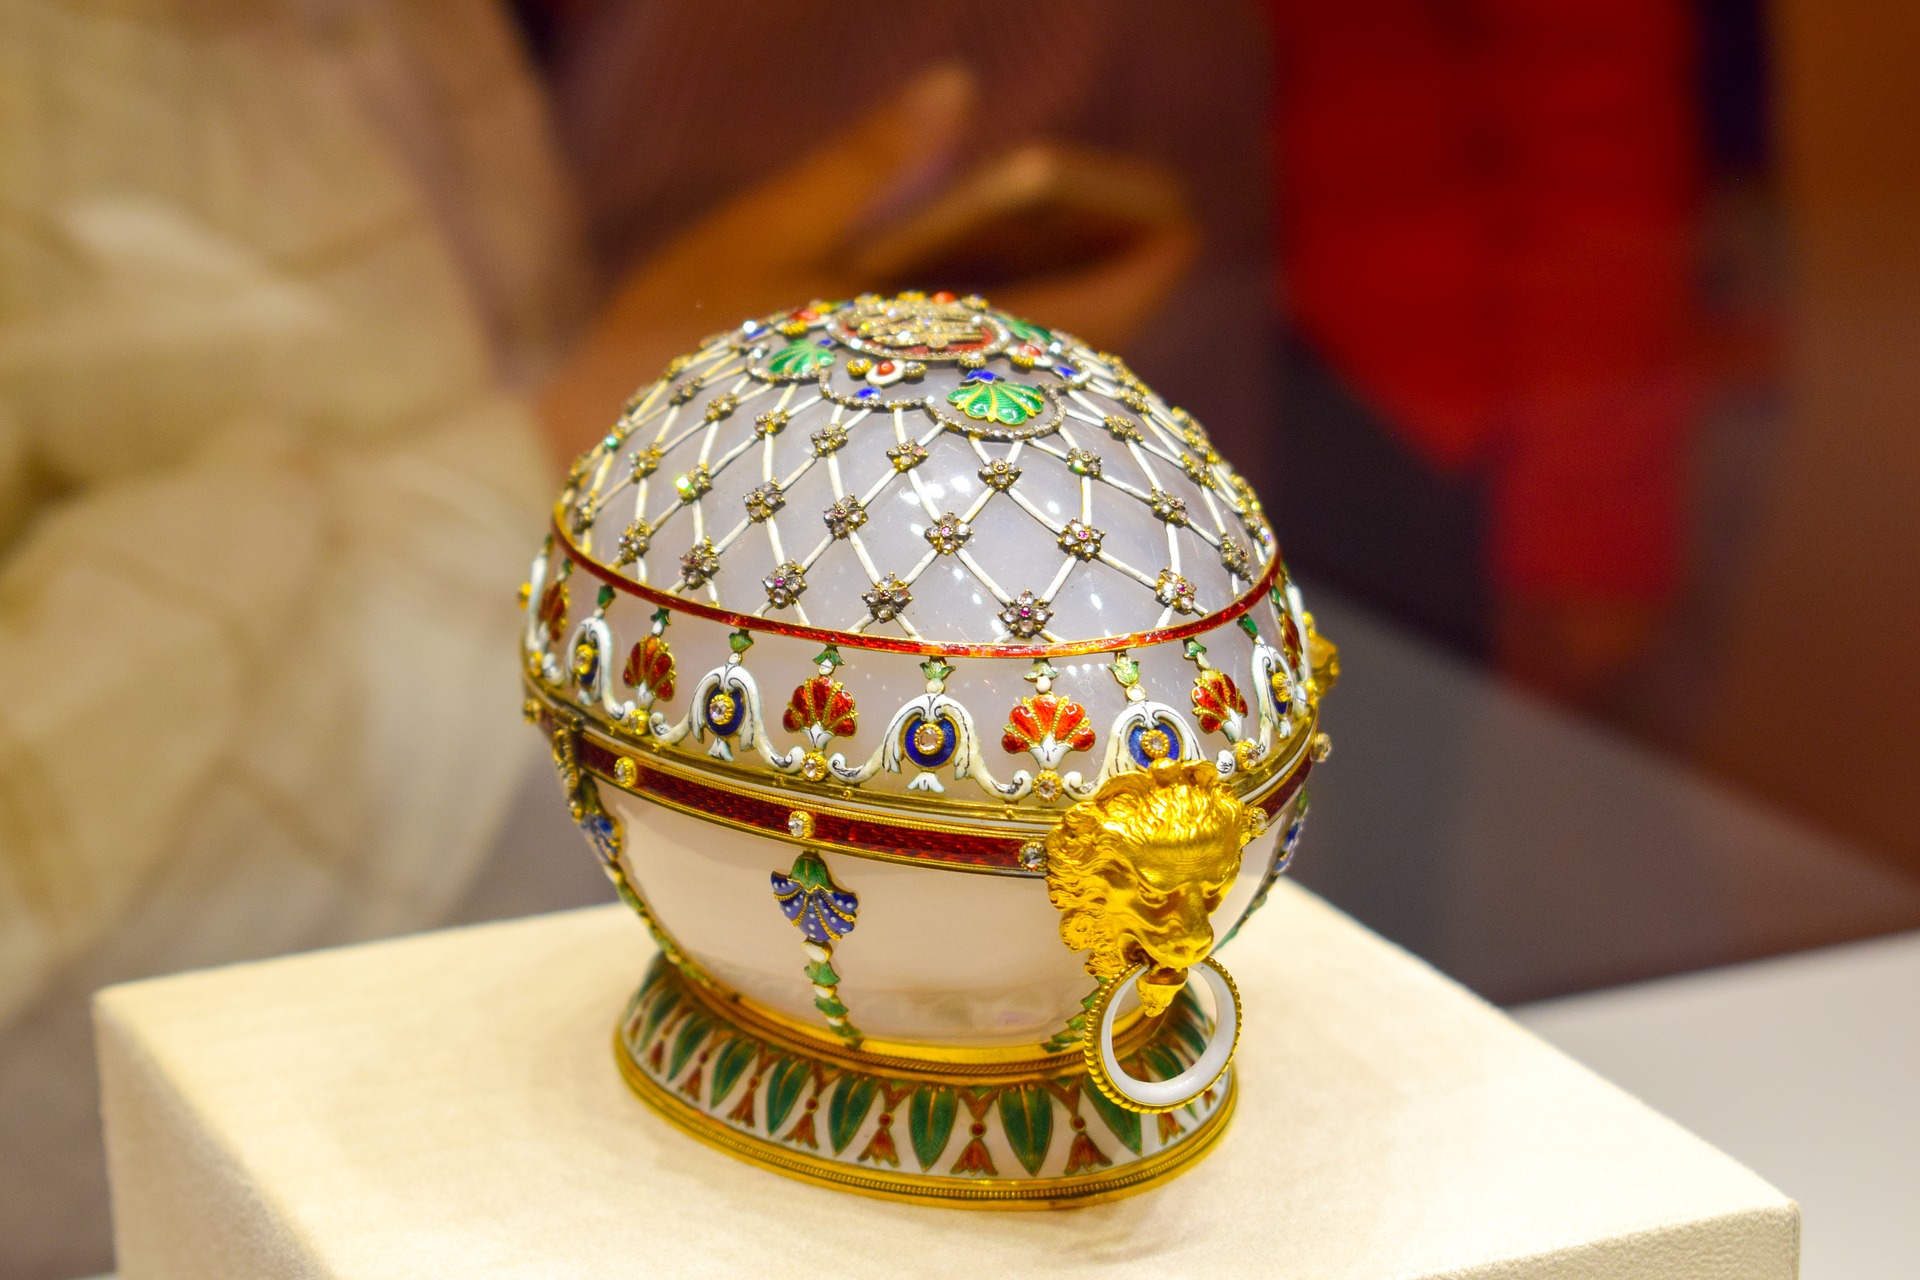 A Museum Could be in Breach of Sanctions if it Returns a Fabergé Egg to its Russian Oligarch Owner